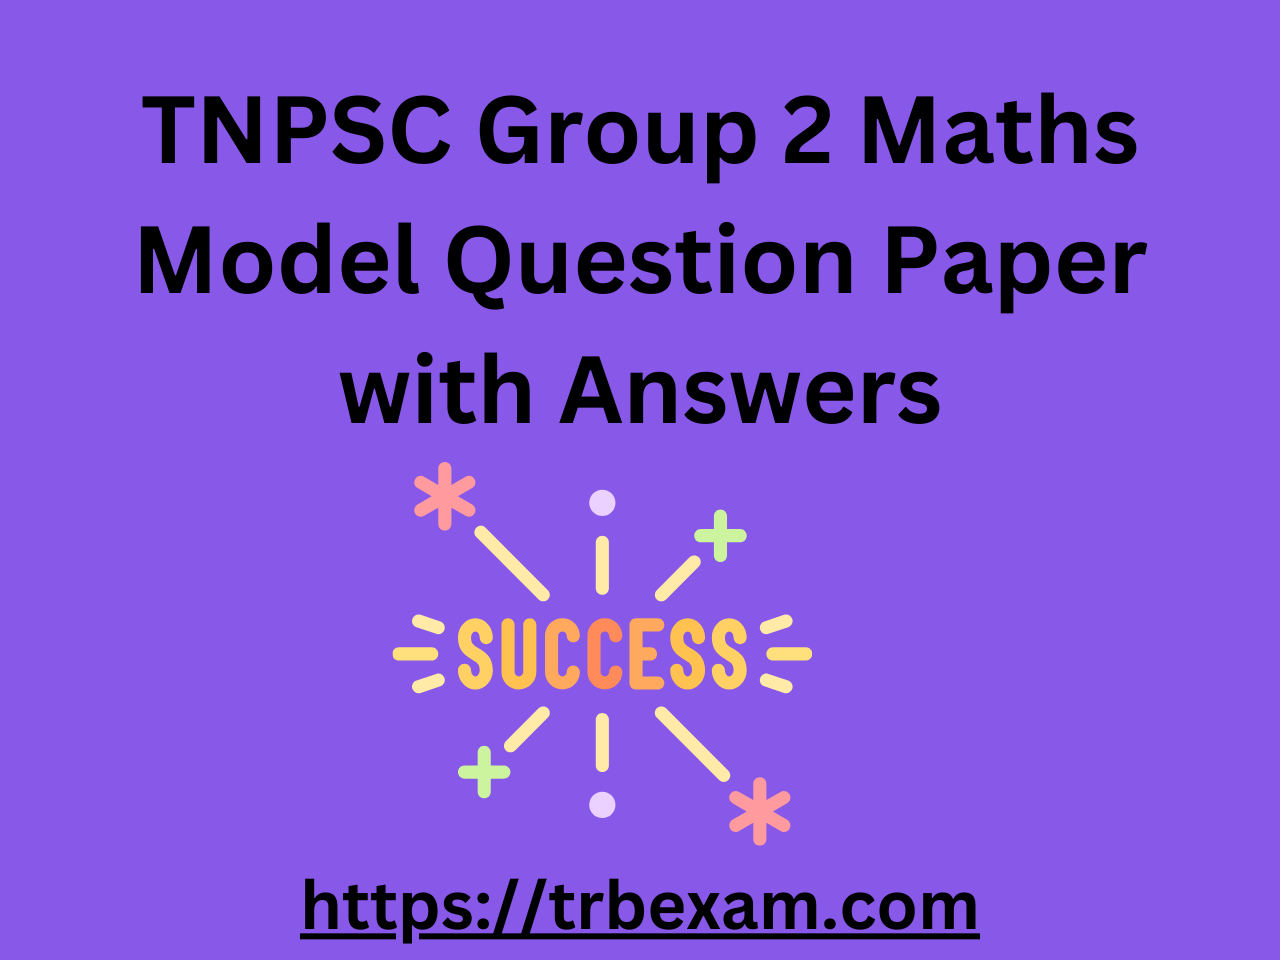 tnpsc group 2 maths model question paper with answers